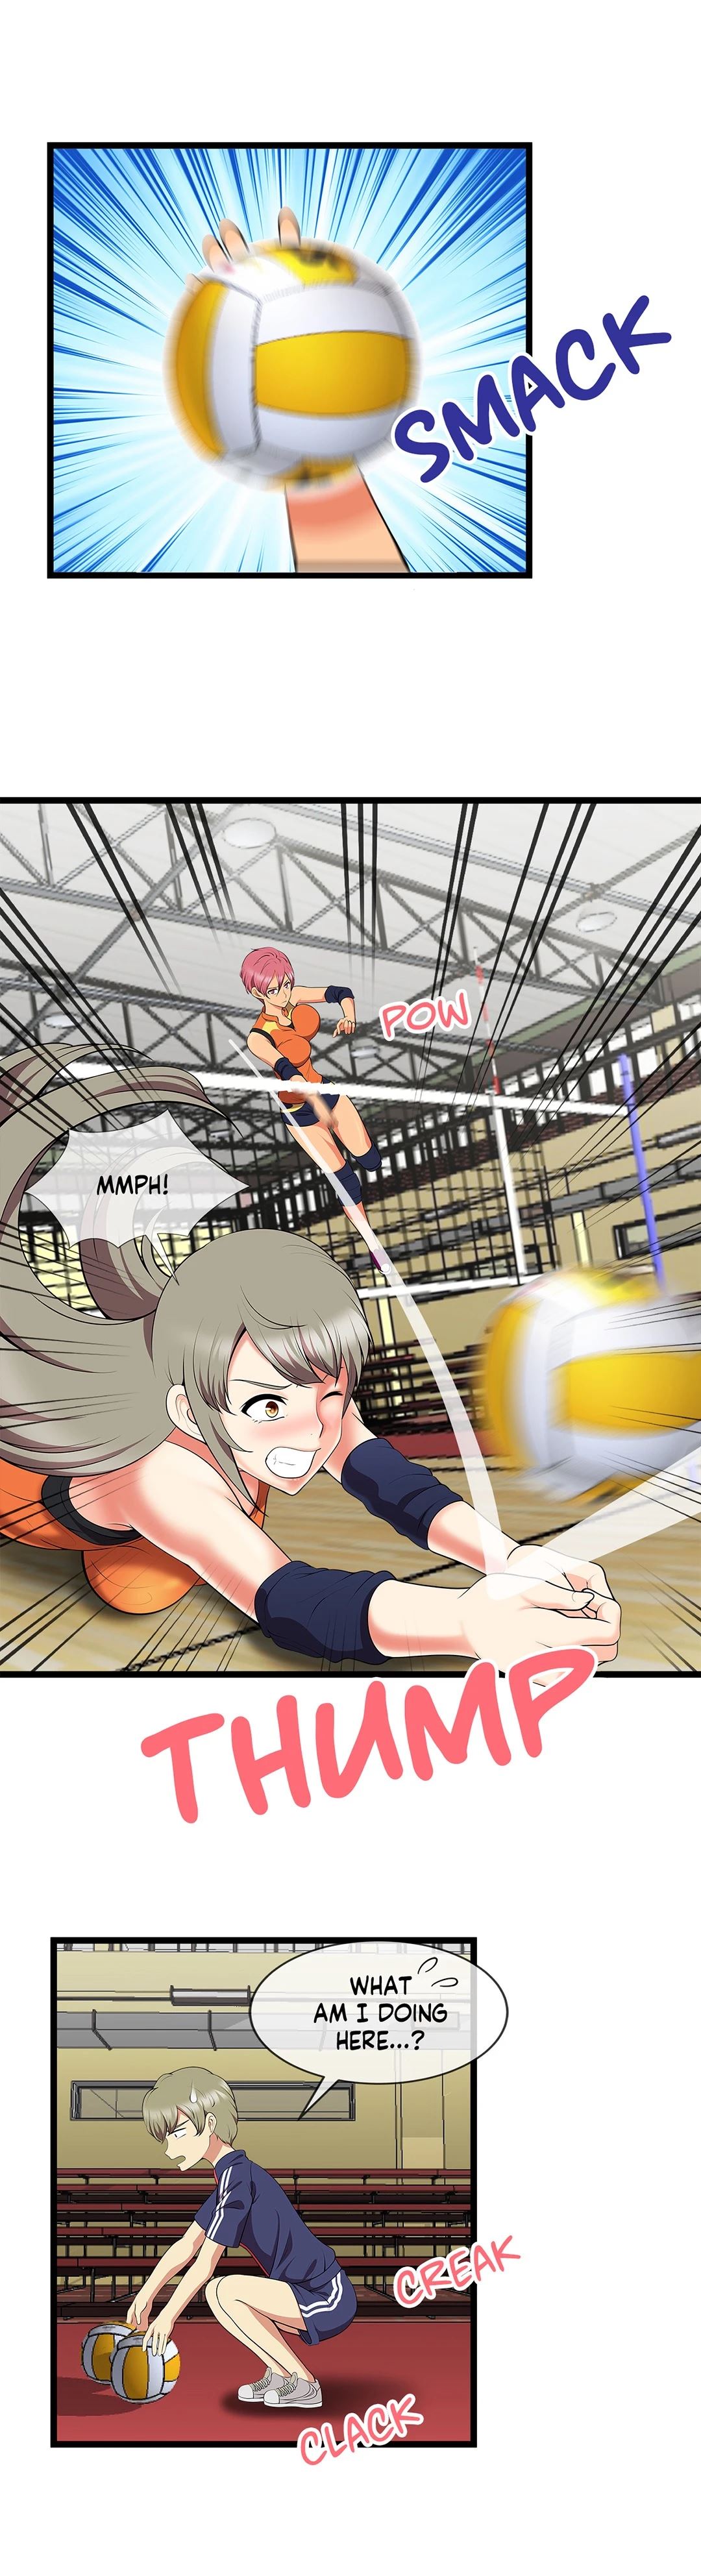 The Naughty Volleyball Team image